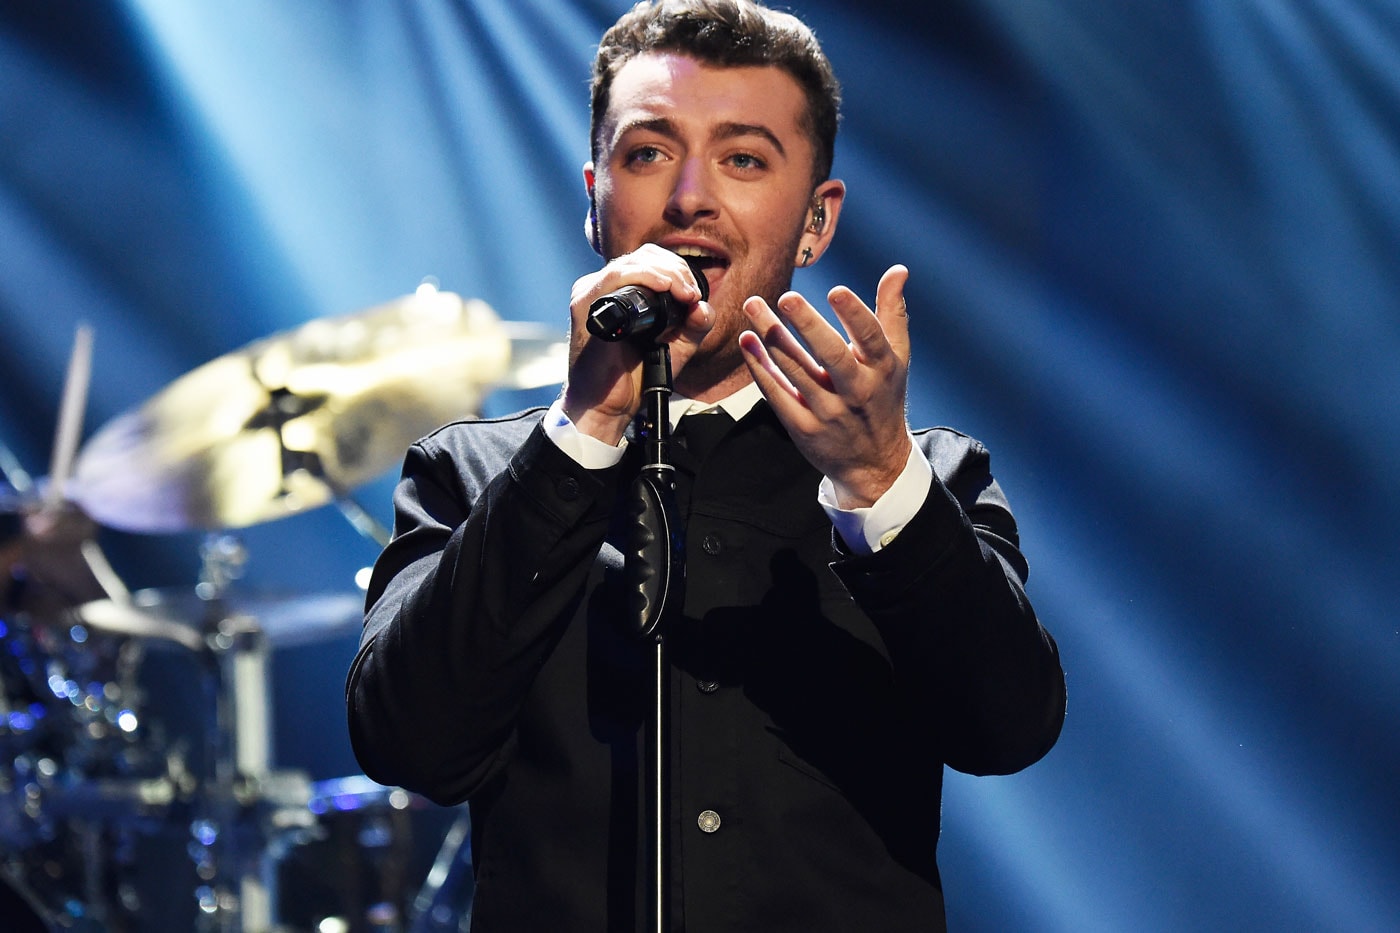 Sam Smith Will Sing the James Bond Theme, "Writing’s On The Wall"